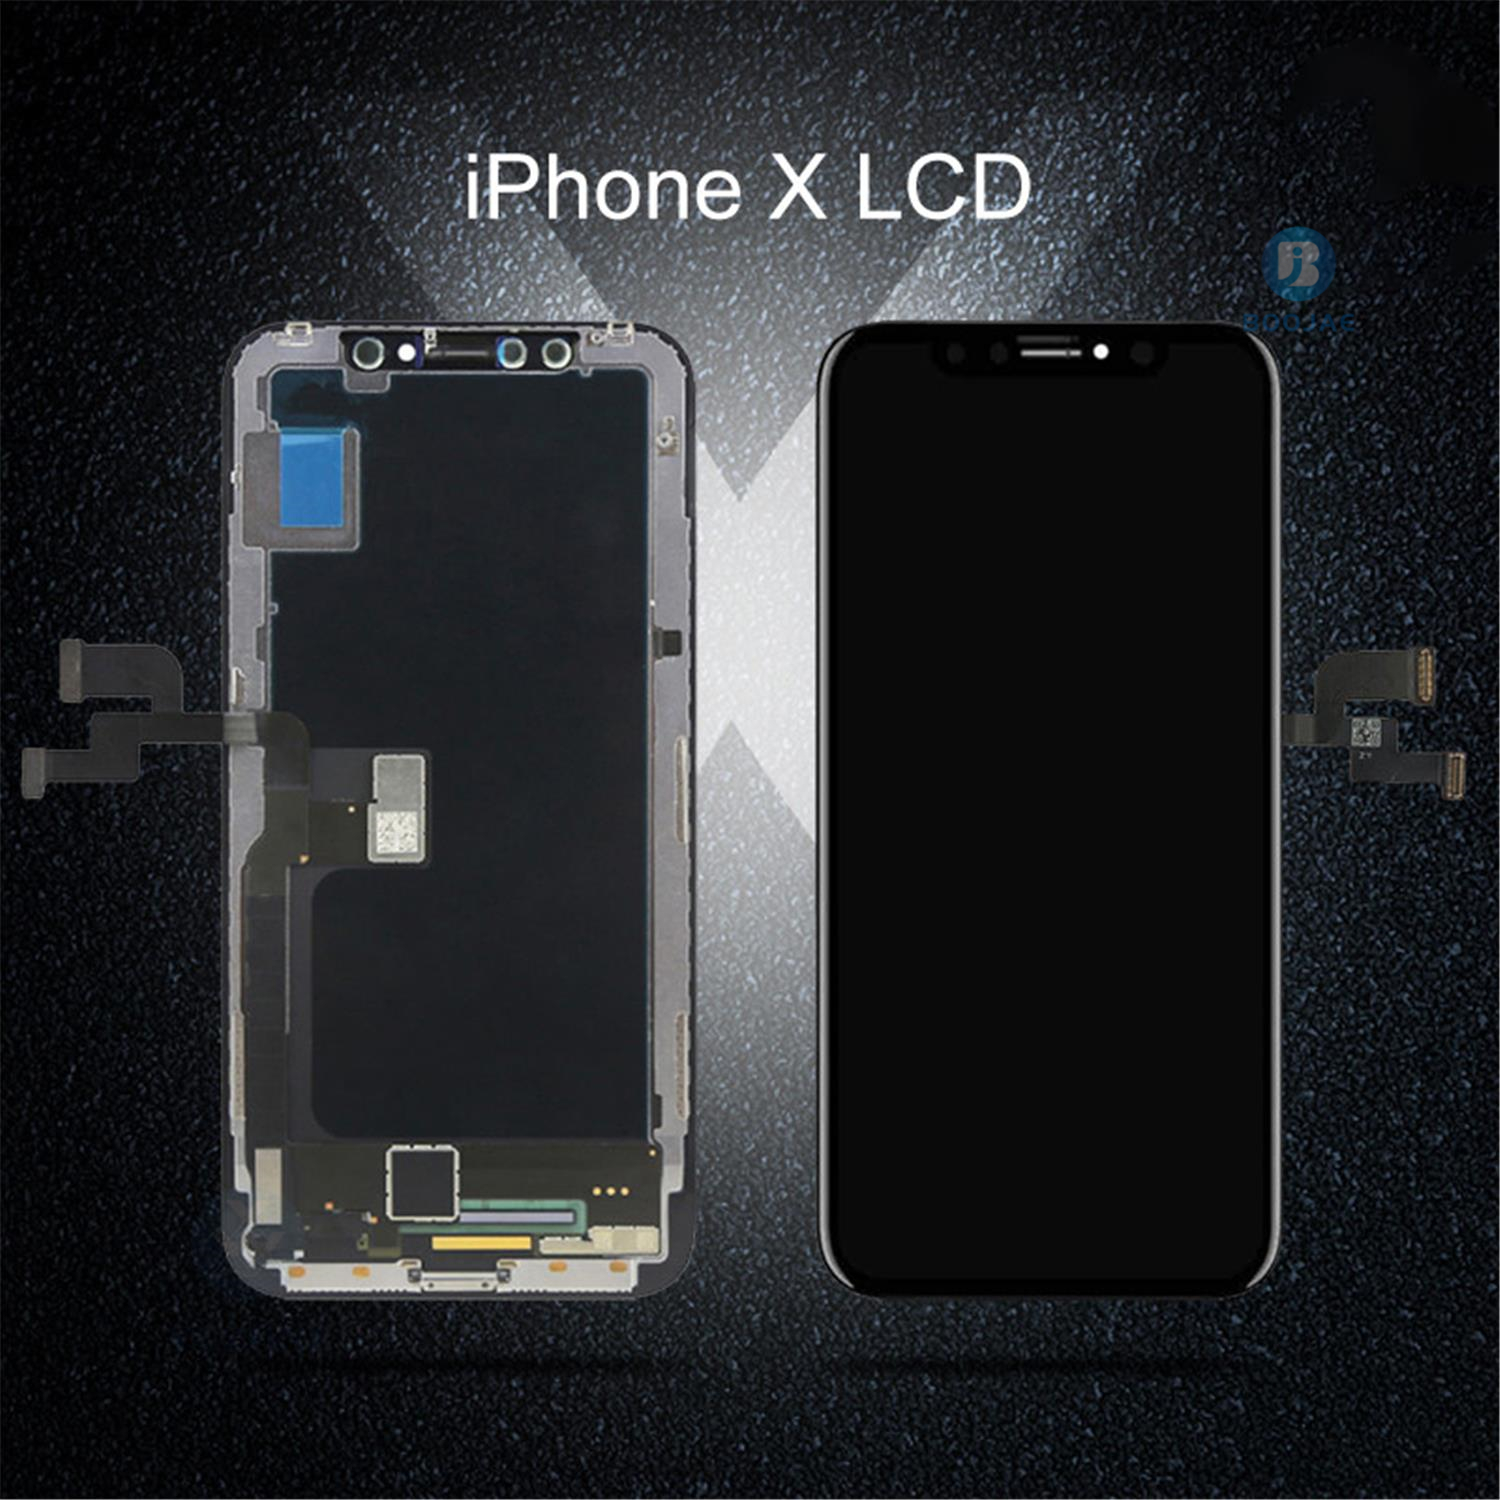 iPhone X LCD Screen Display and Touch Panel Digitizer Assembly Replacement